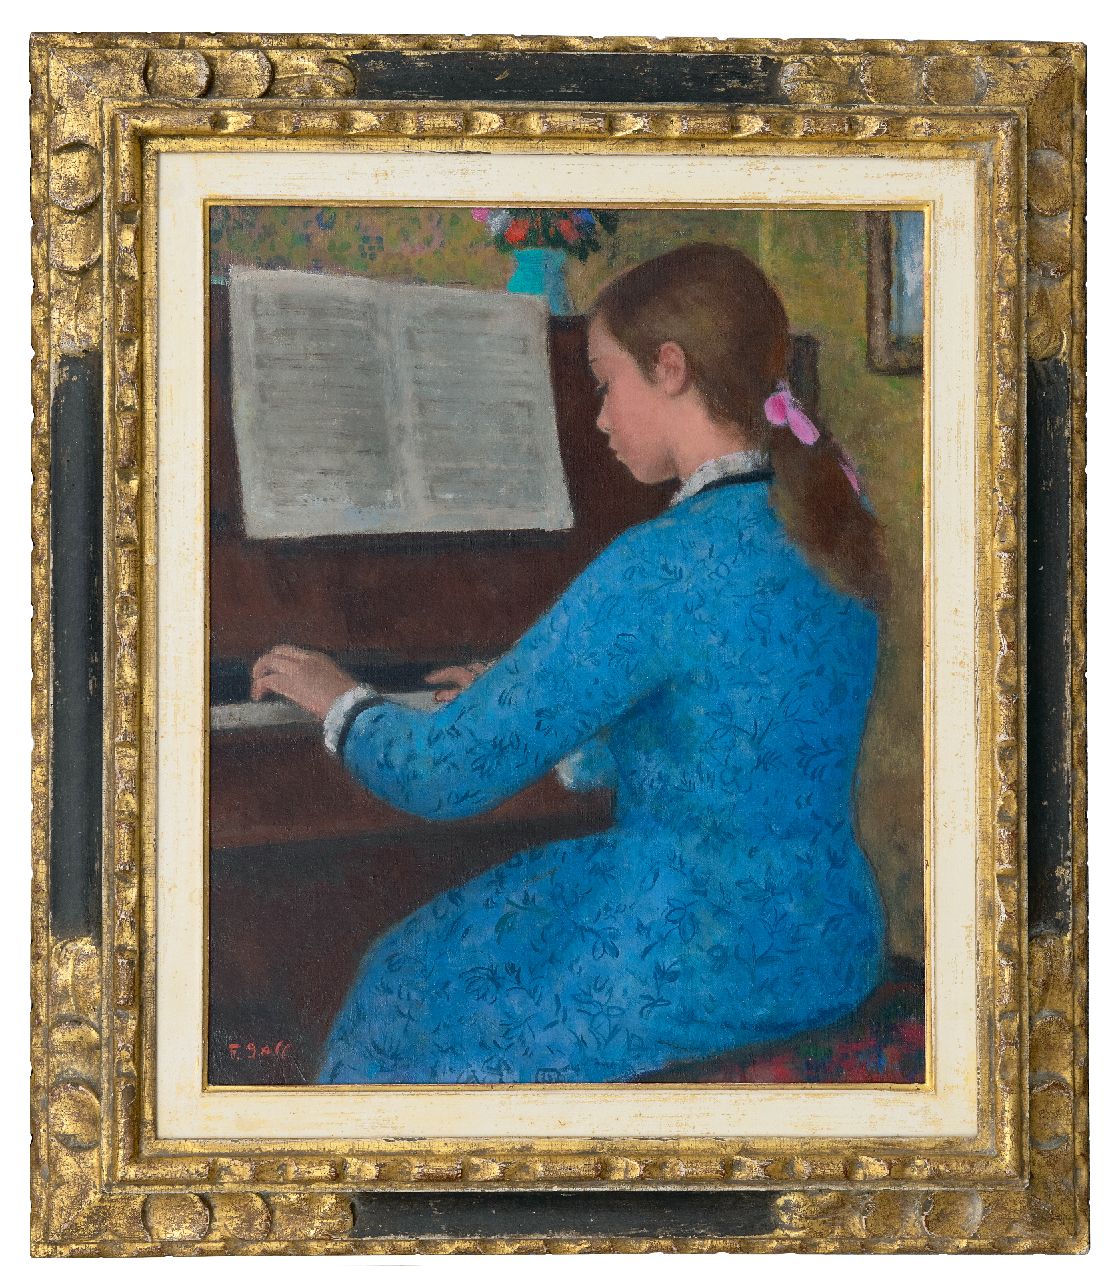 Gall F.  | Ferenç 'François' Gall | Paintings offered for sale | Elizabeth-Anne Gall at the piano, oil on canvas 46.1 x 38.2 cm, signed l.l.